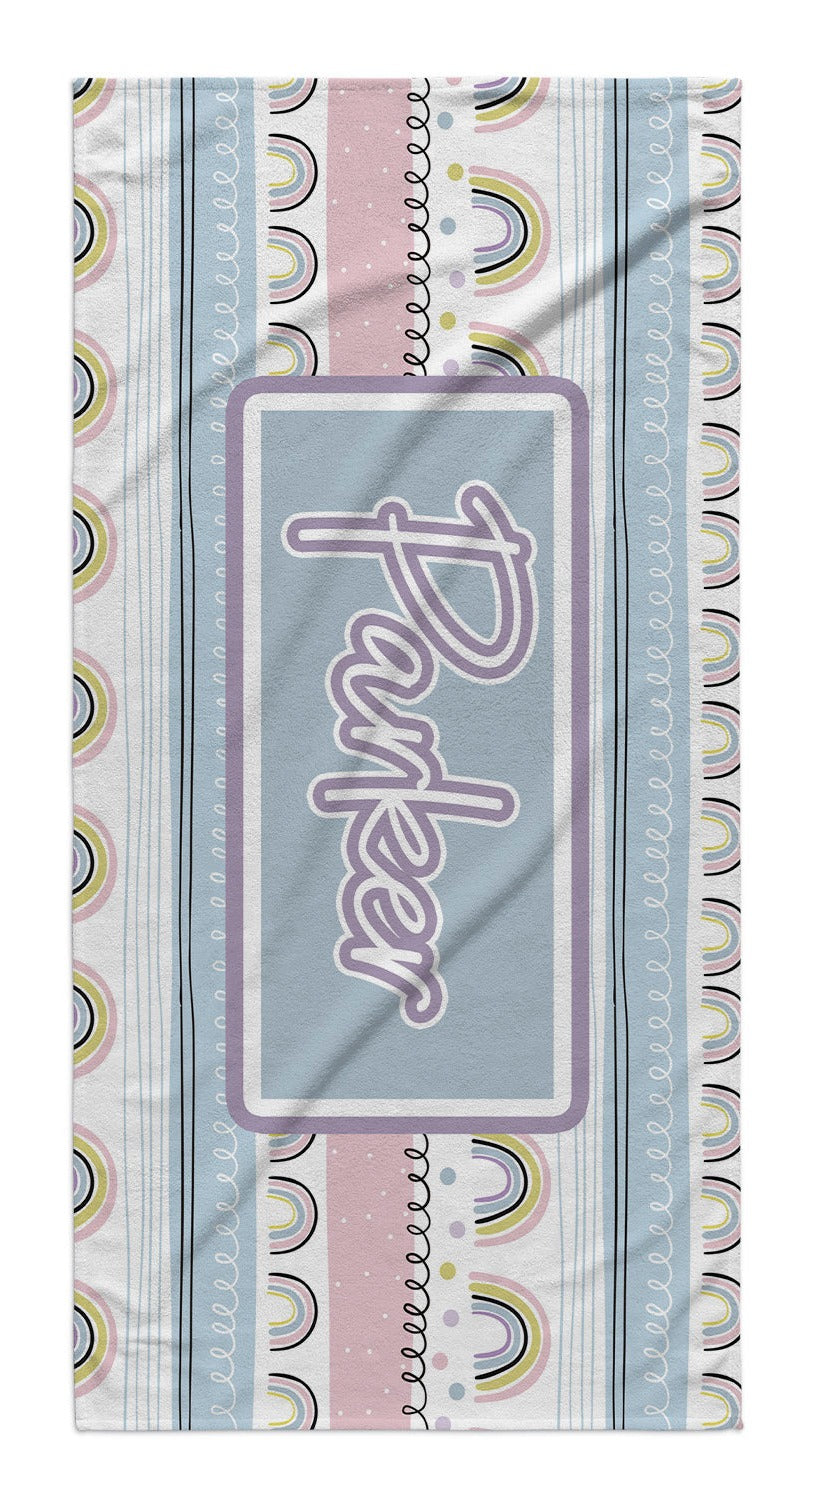 ROWS OF RAINBOWS PERSONALIZED TOWEL